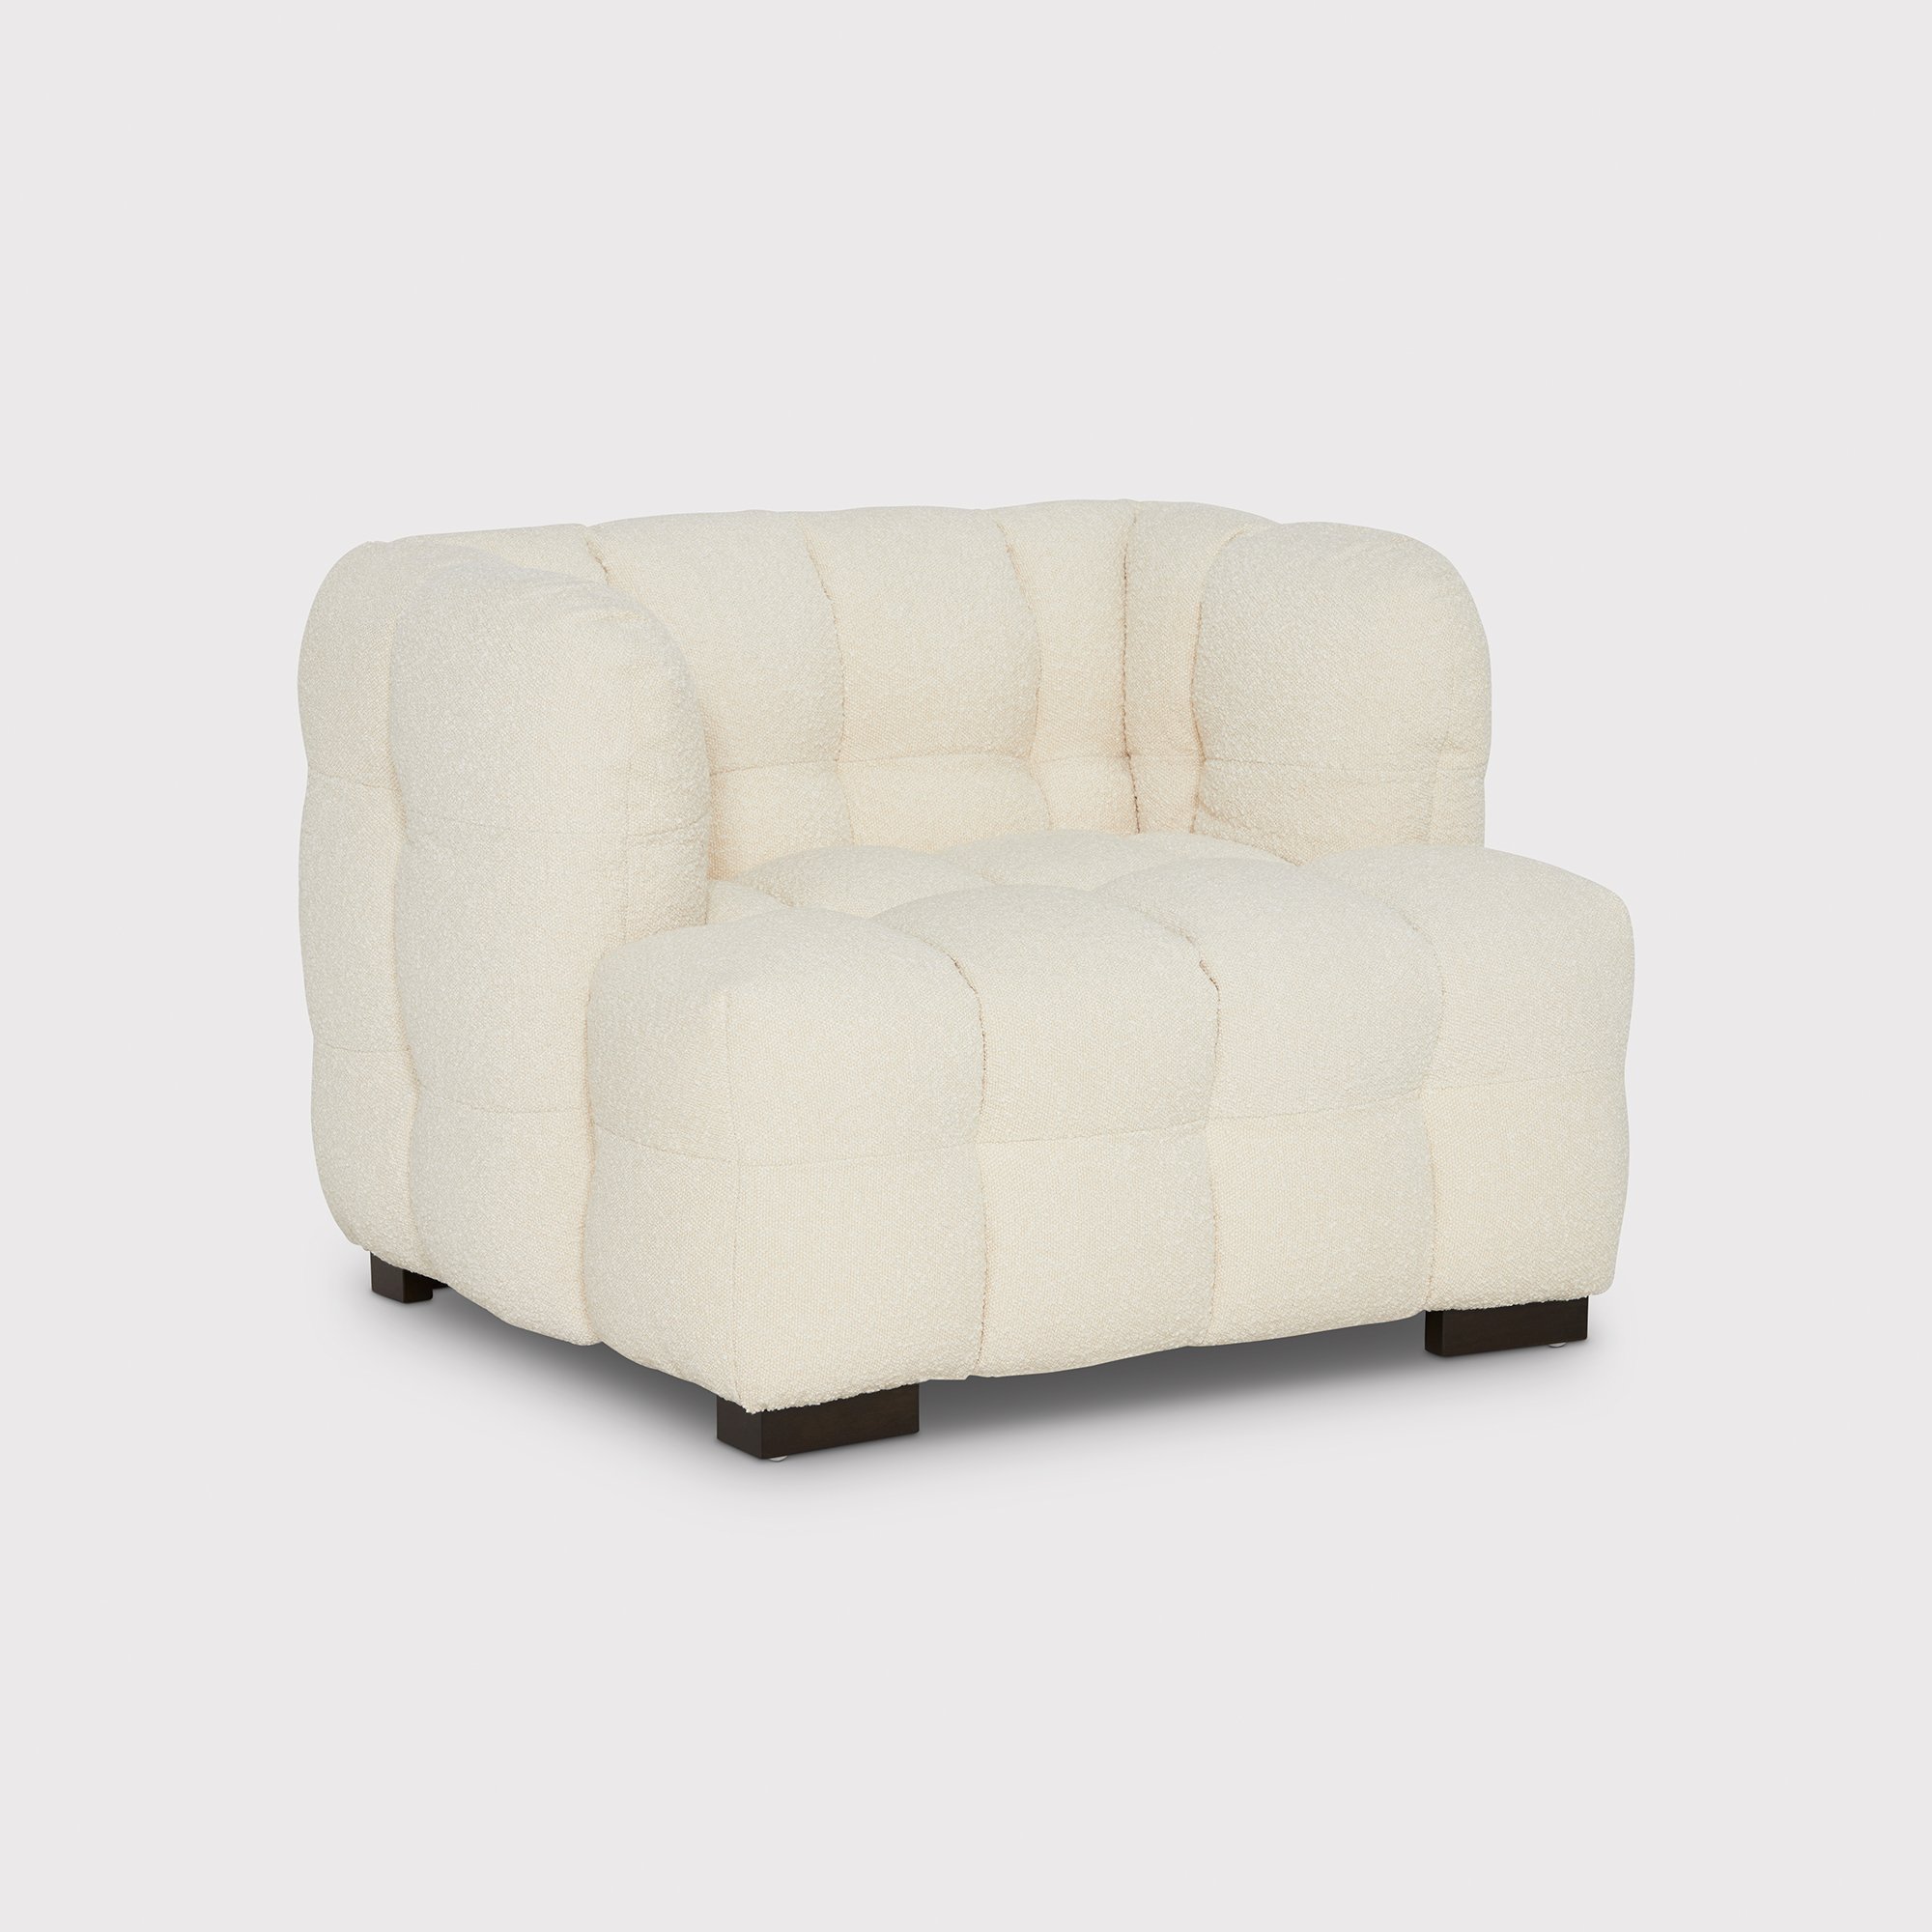 Lenor Occasional Armchair, White Fabric | Barker & Stonehouse